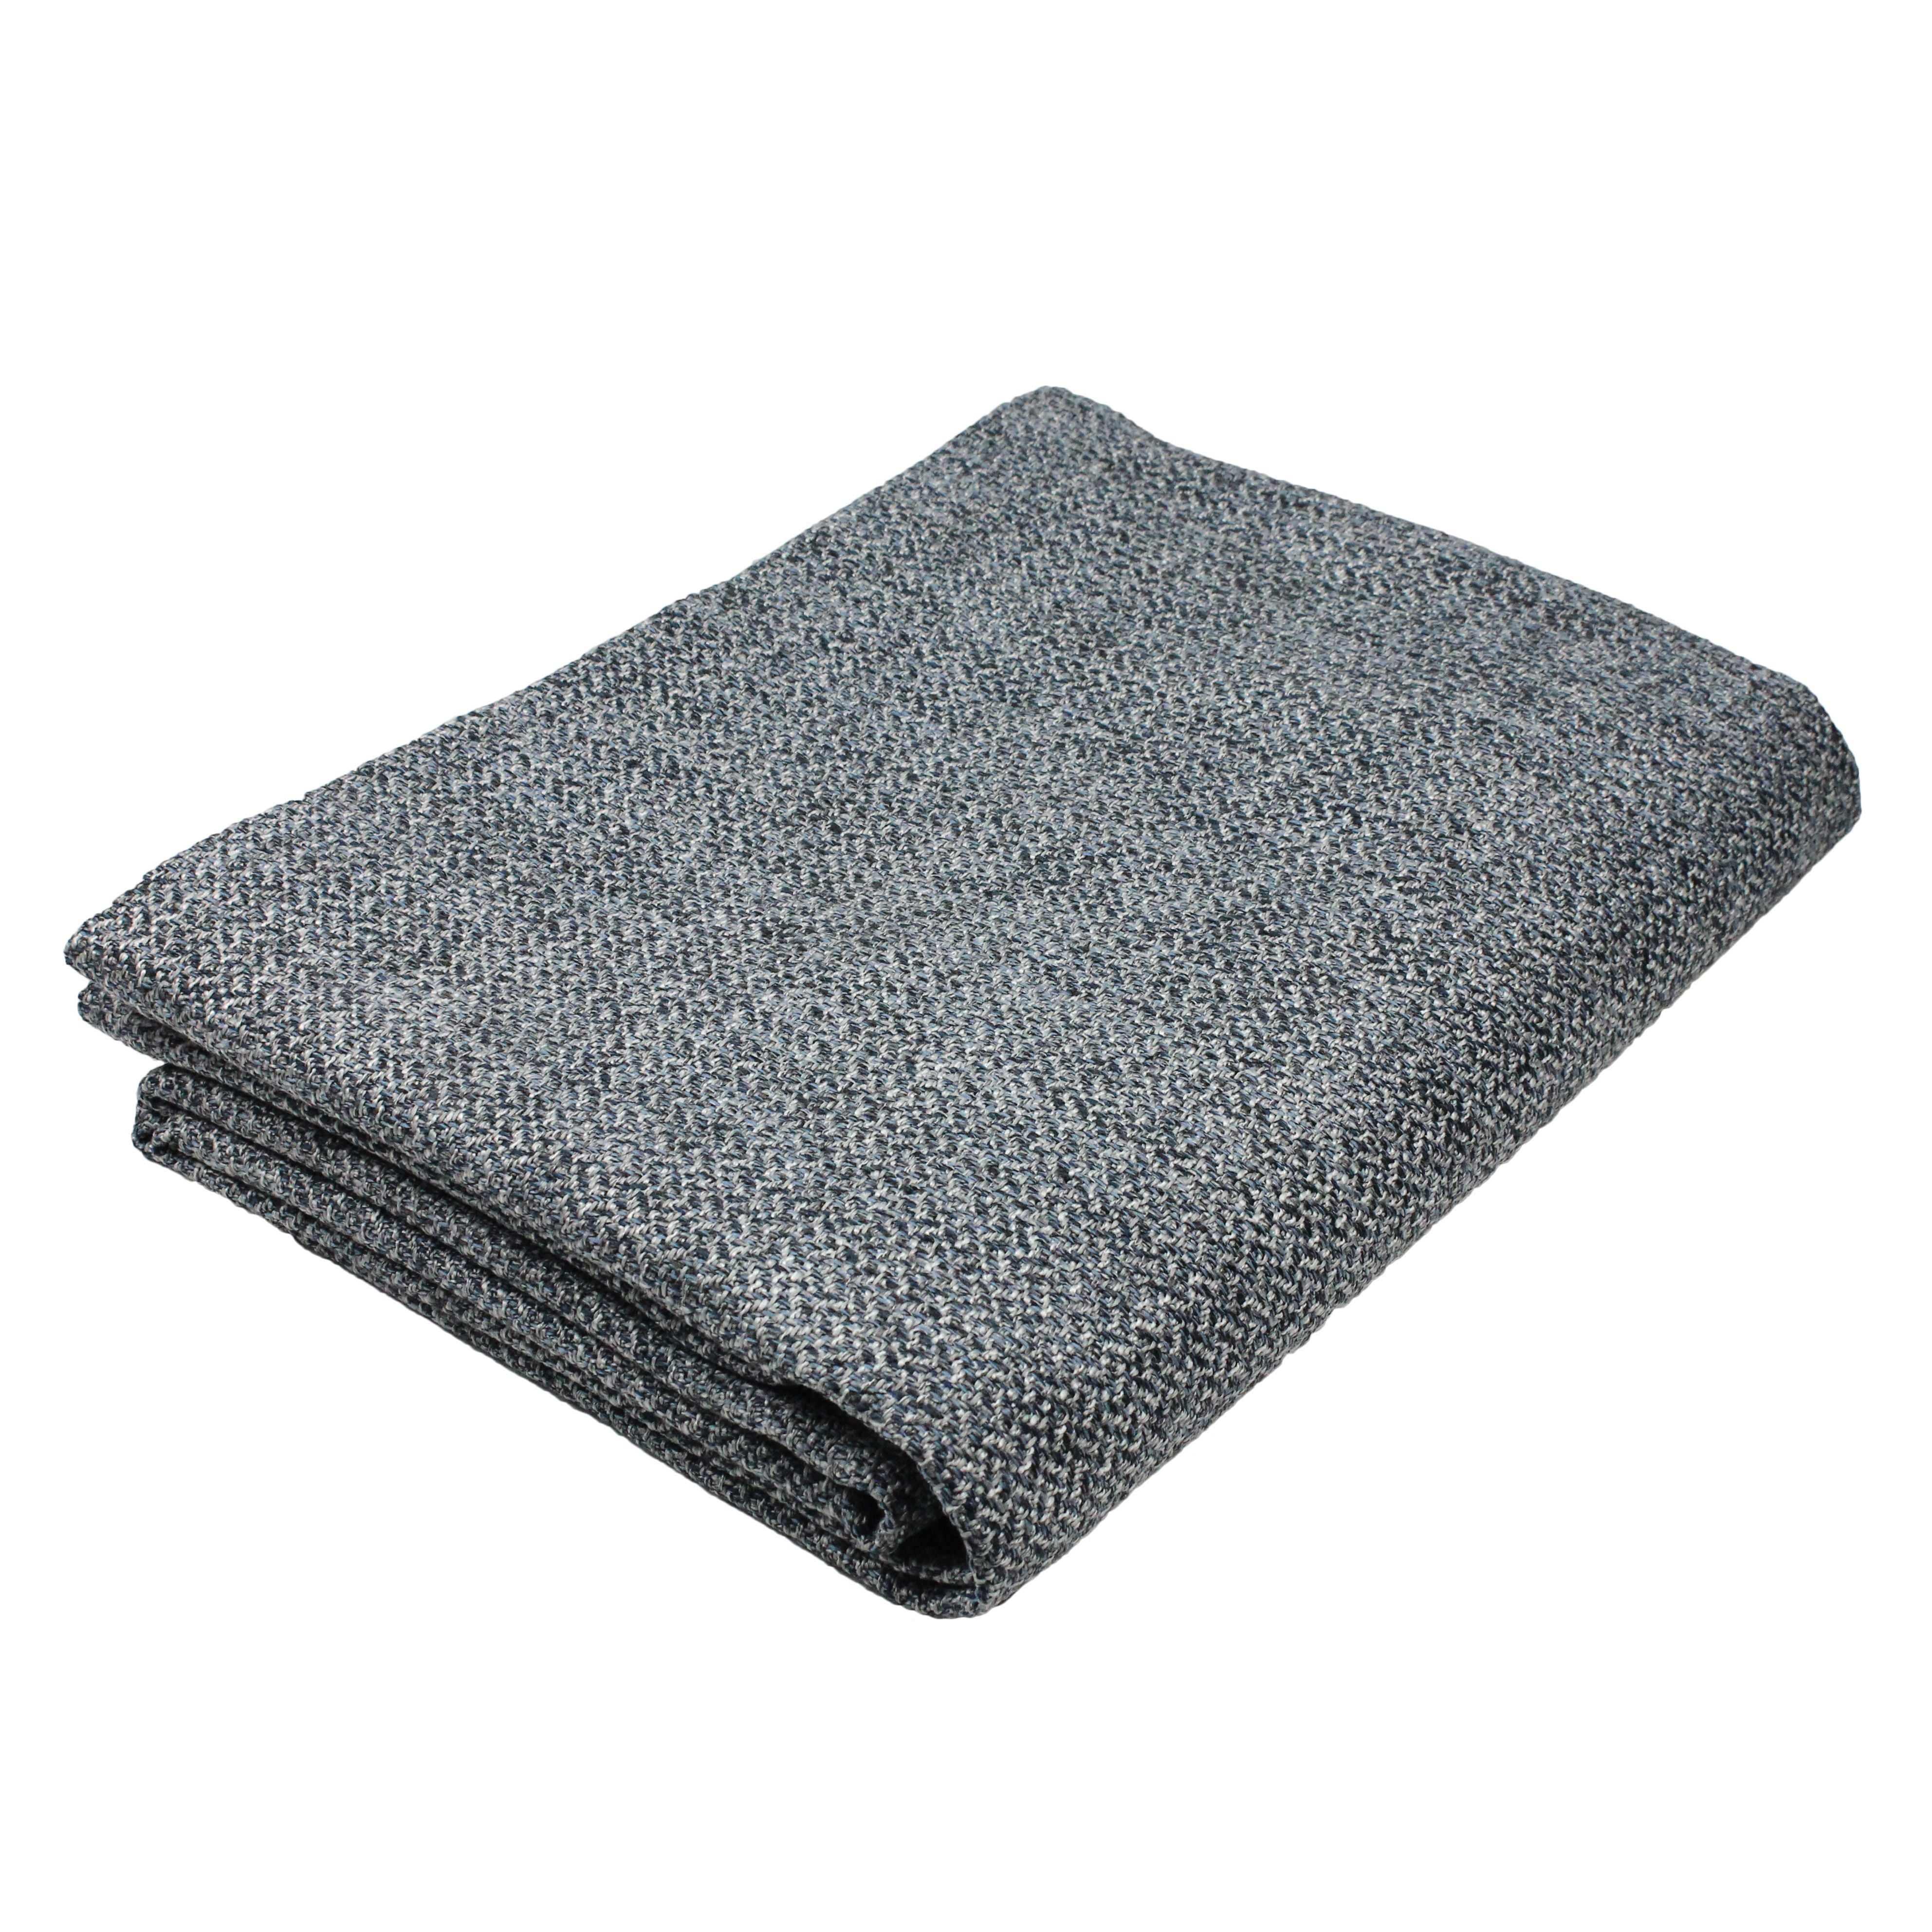 McAlister Textiles Harris Tweed Throws and Runners - Blue & Grey Throws and Runners Bed Runner (50cm x 240cm) 